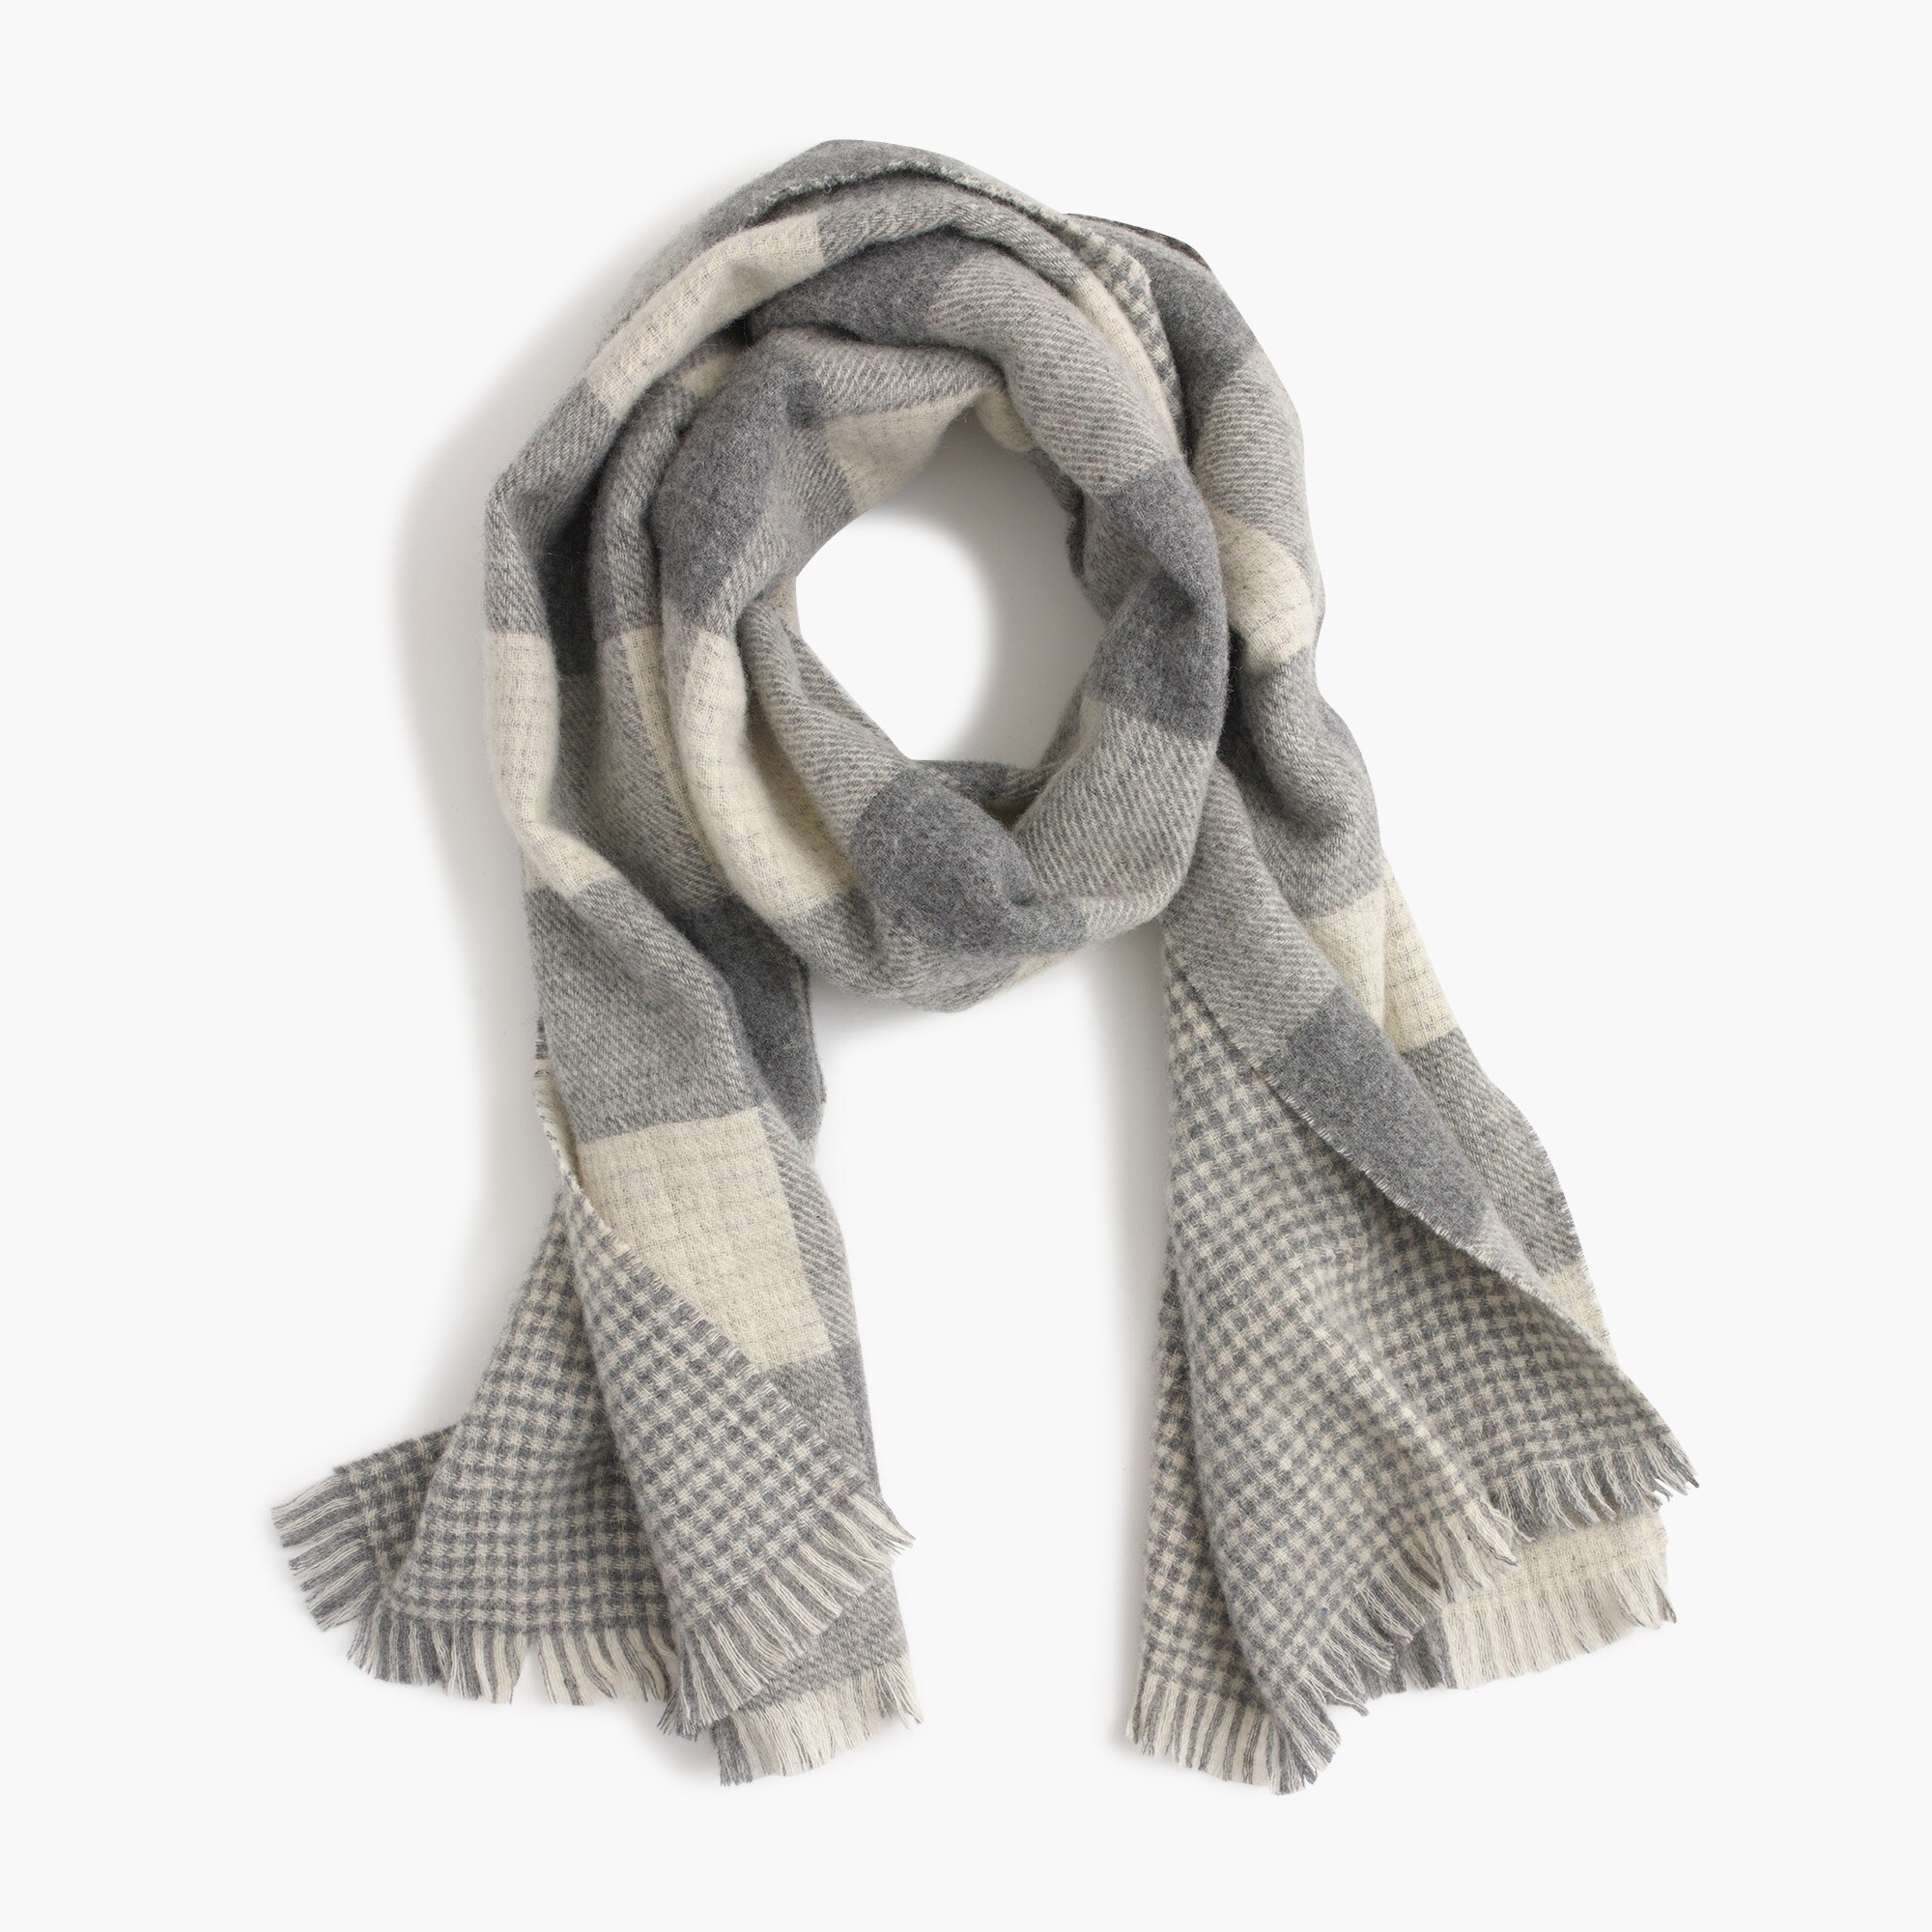 J.Crew: Reversible buffalo check houndstooth wool scarf